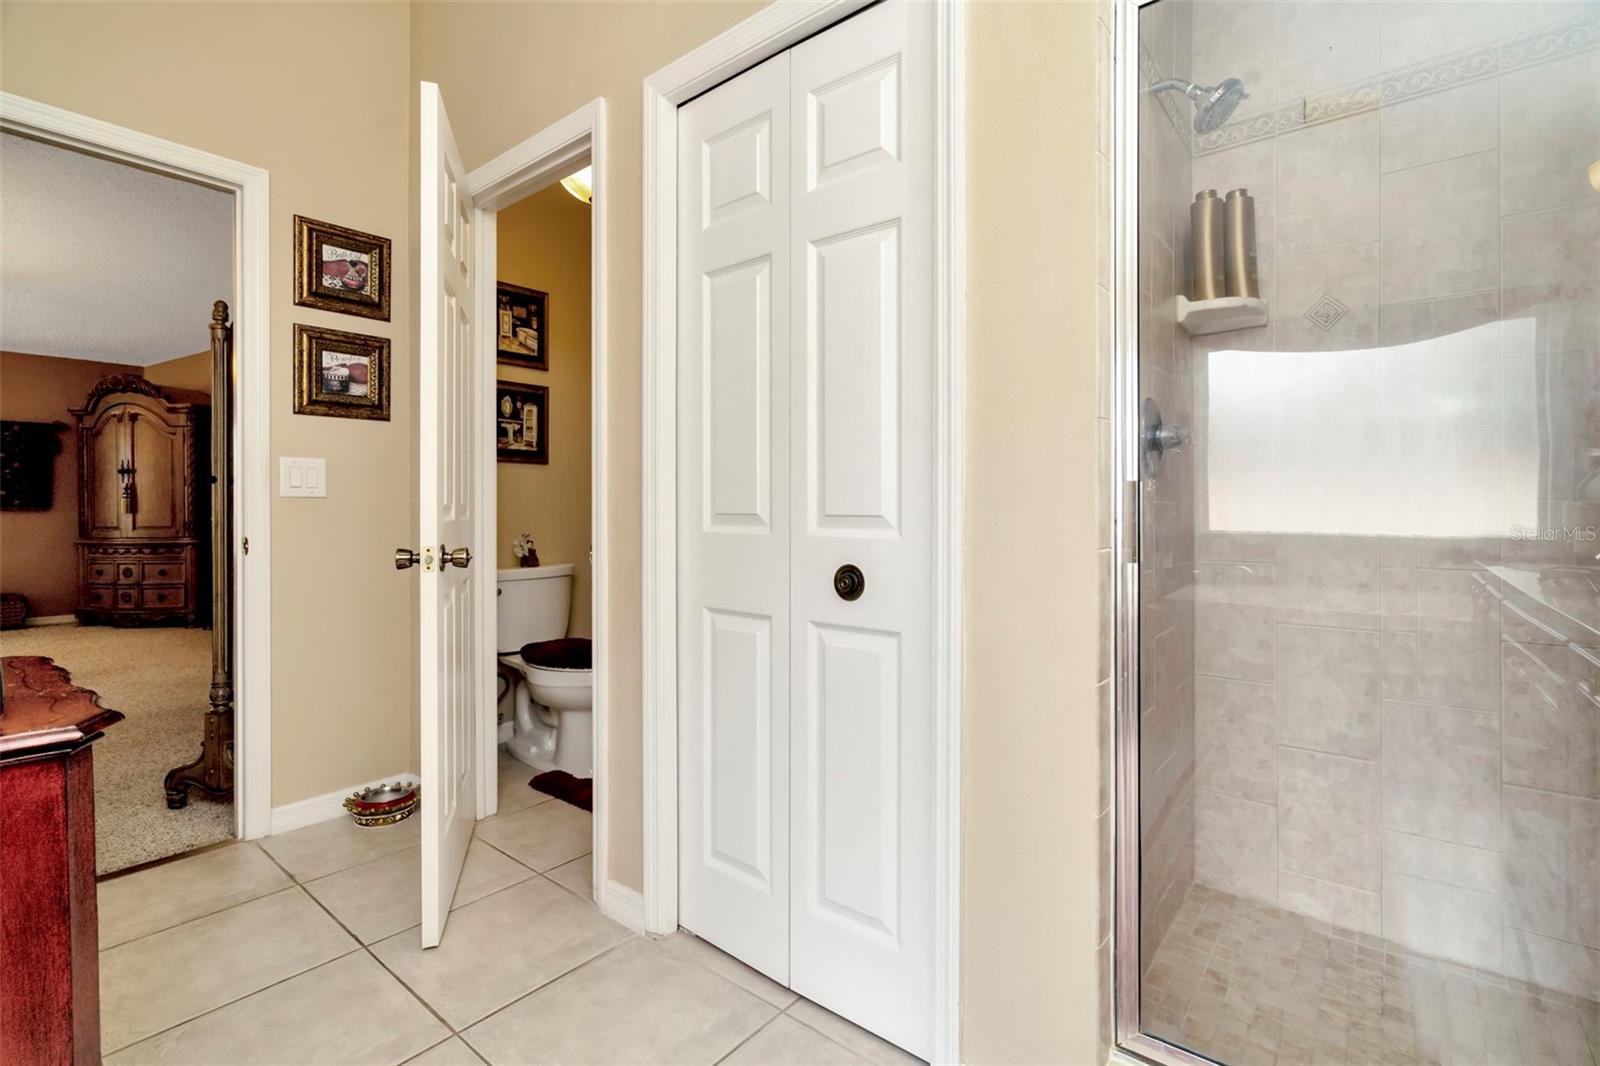 Large shower and separate water closet or "private library"